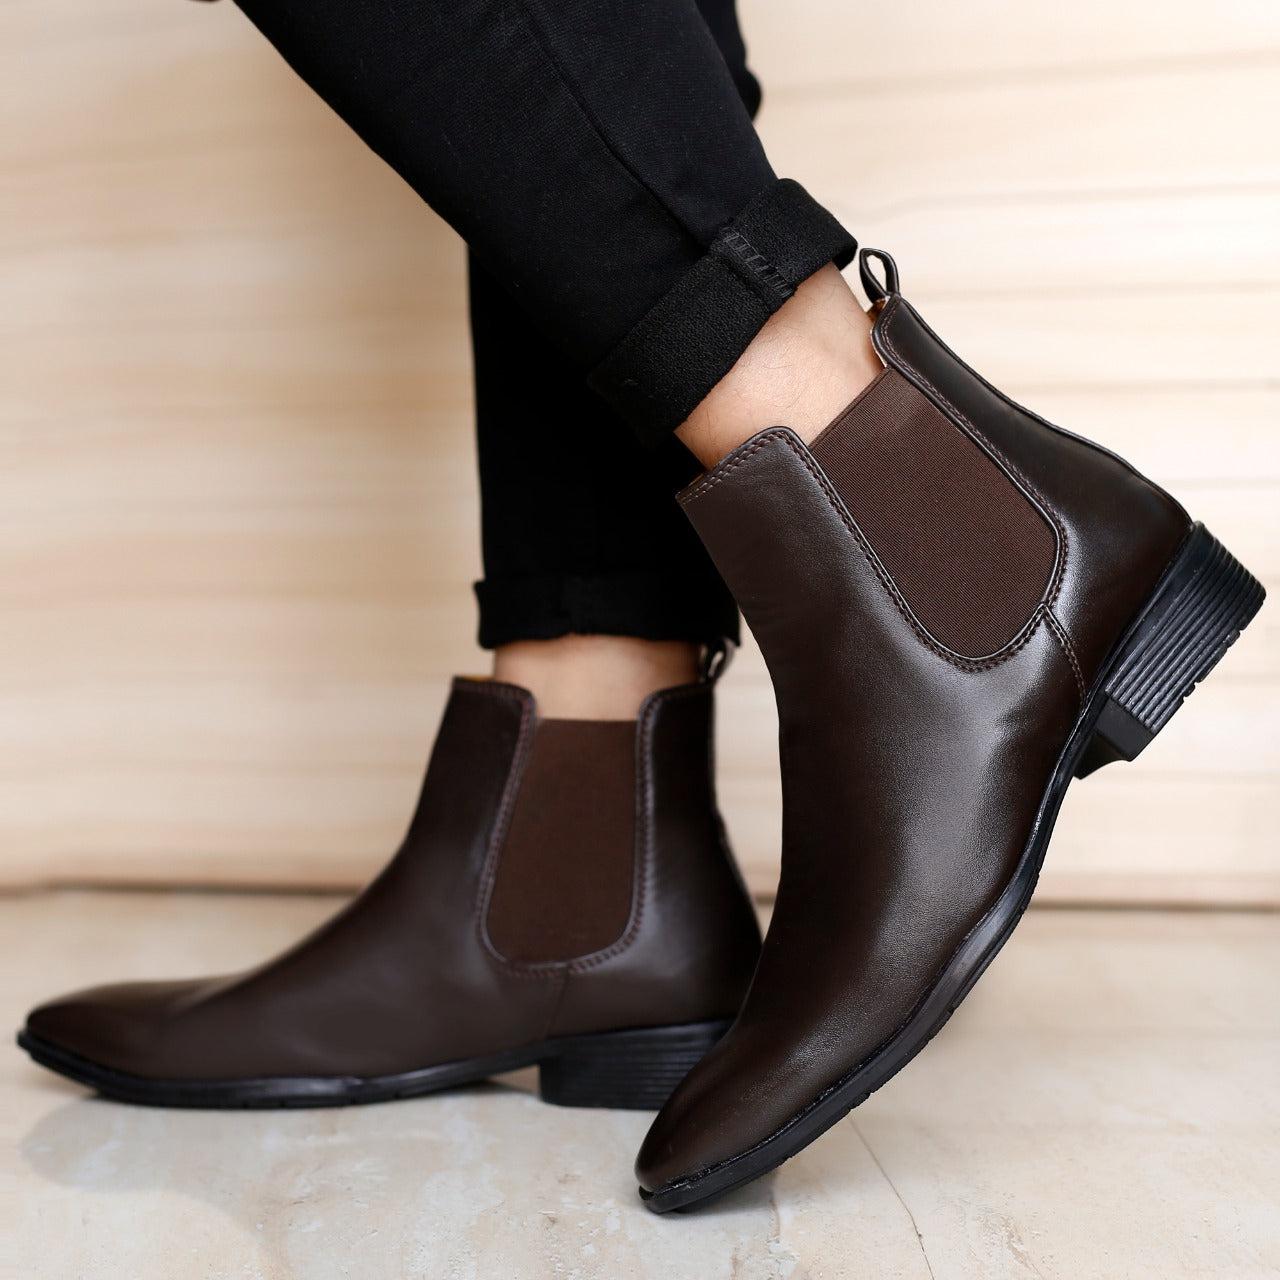 New Men's Stylish Formal and Casual Wear British Chelsea Ankle Boots - JACKMARC.COM